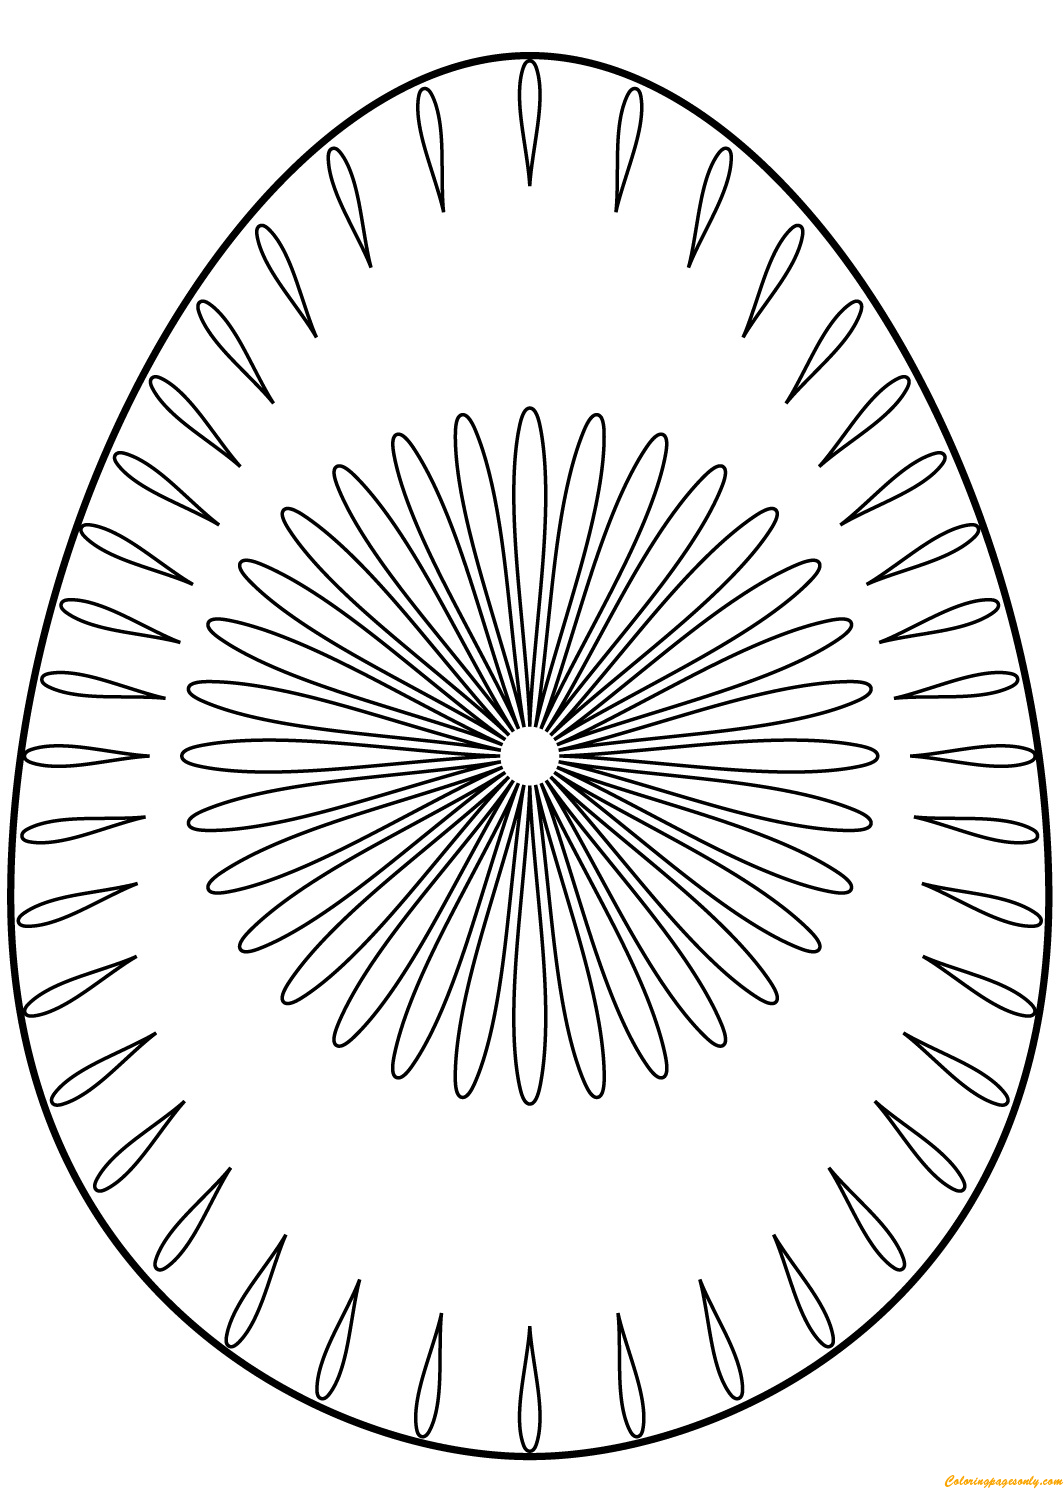 Easter Egg Flower Pattern Like Bright Sun Coloring Page